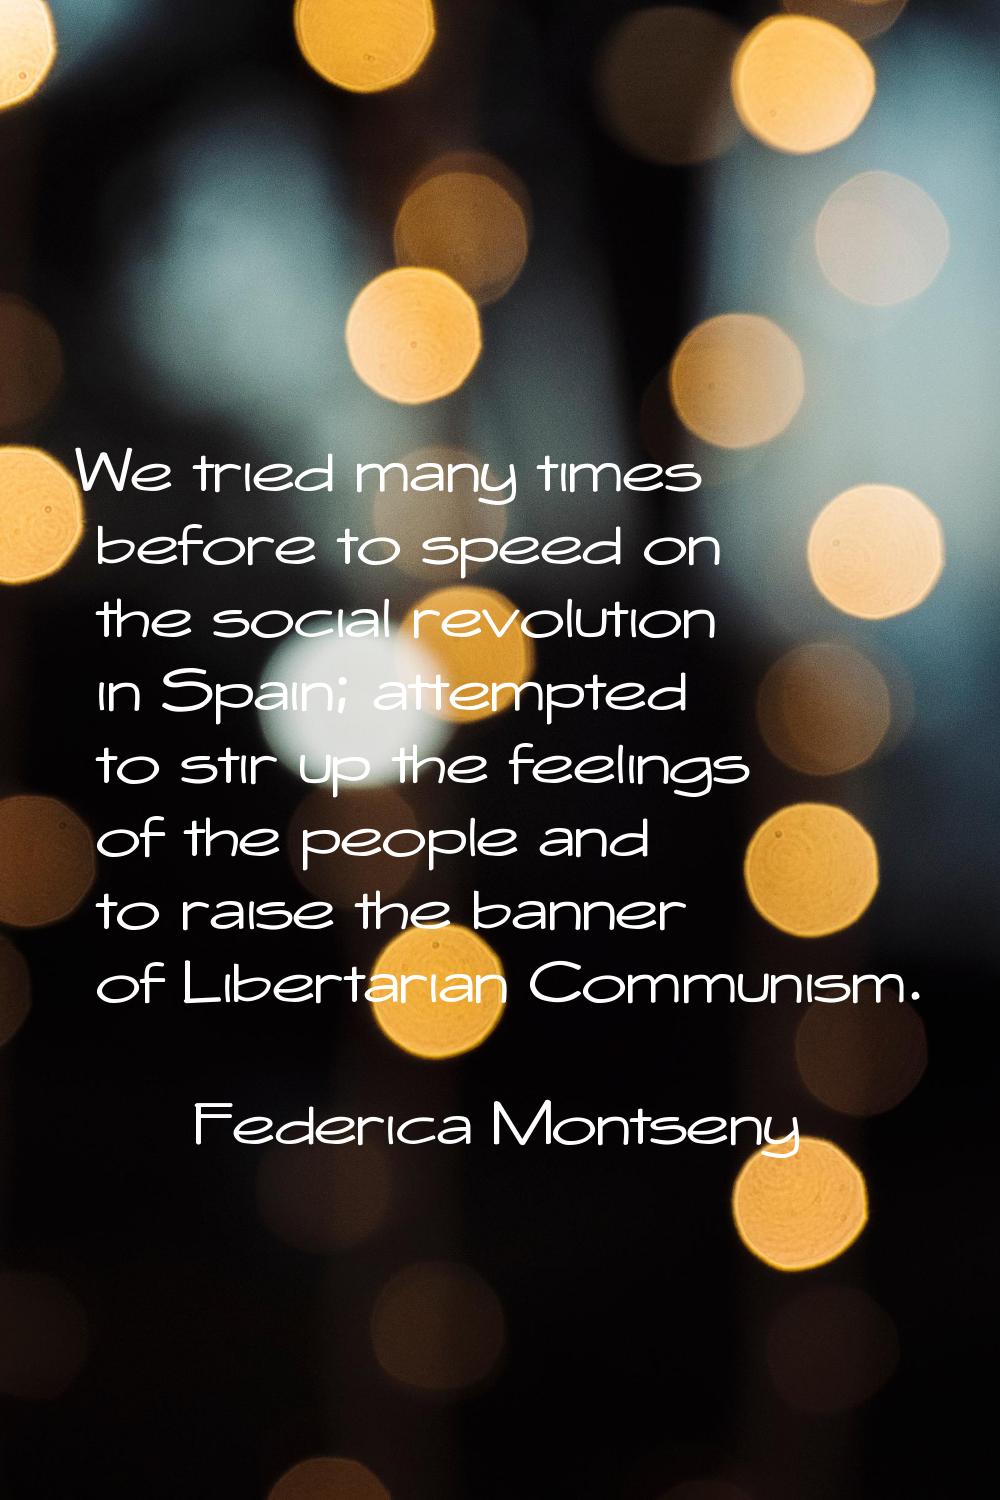 We tried many times before to speed on the social revolution in Spain; attempted to stir up the fee